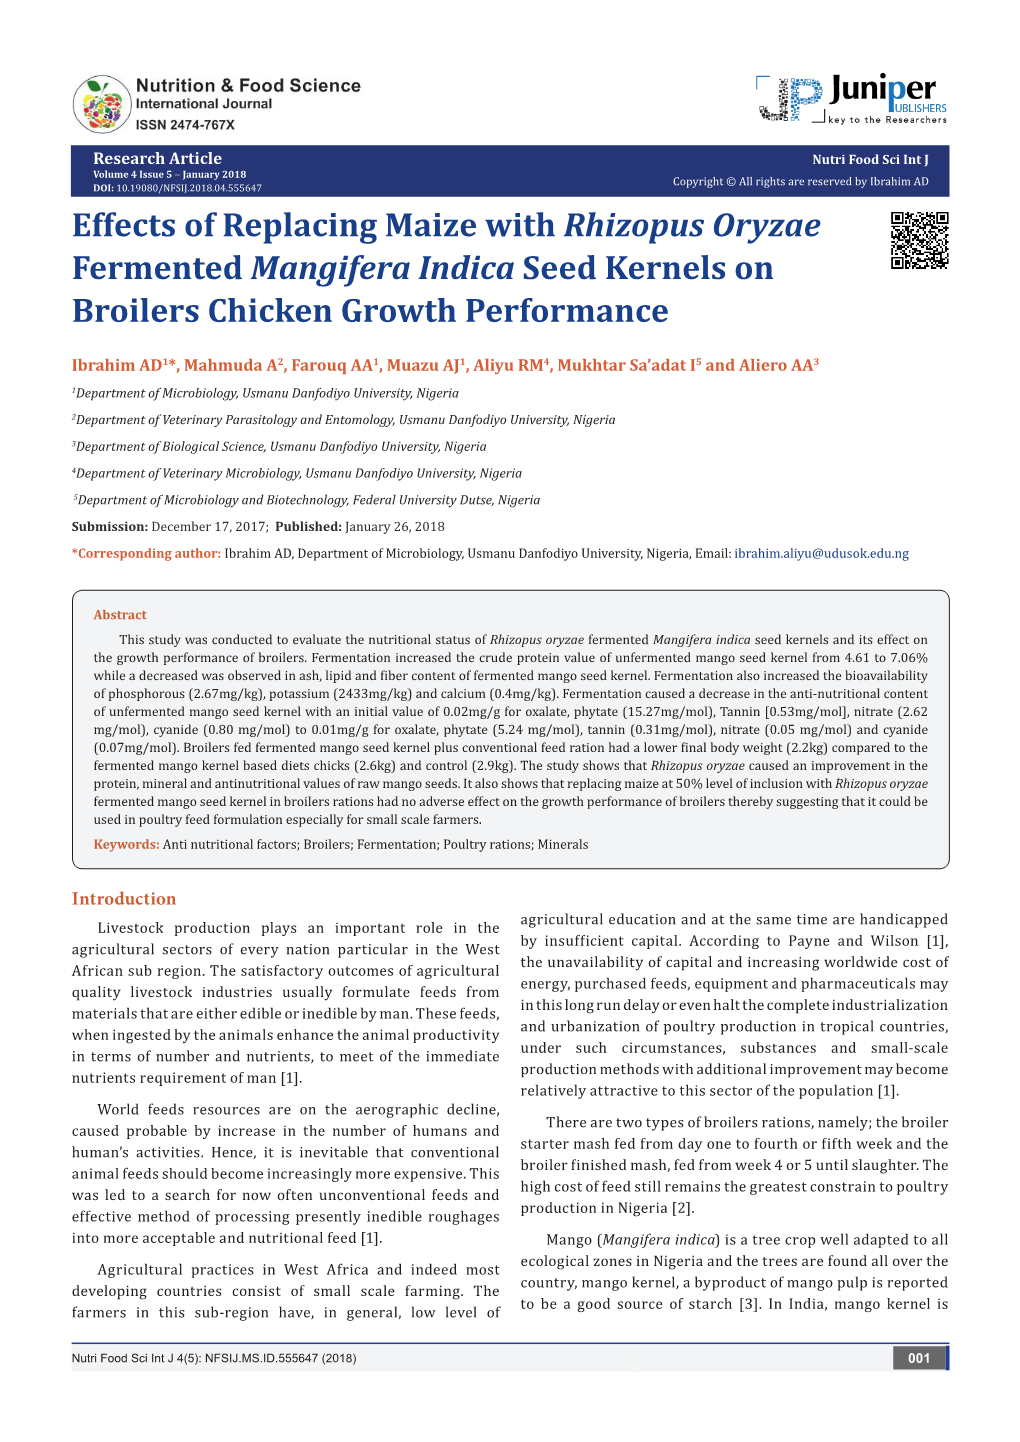 Effects of Replacing Maize with Rhizopus Oryzae Fermented Mangifera Indica Seed Kernels on Broilers Chicken Growth Performance